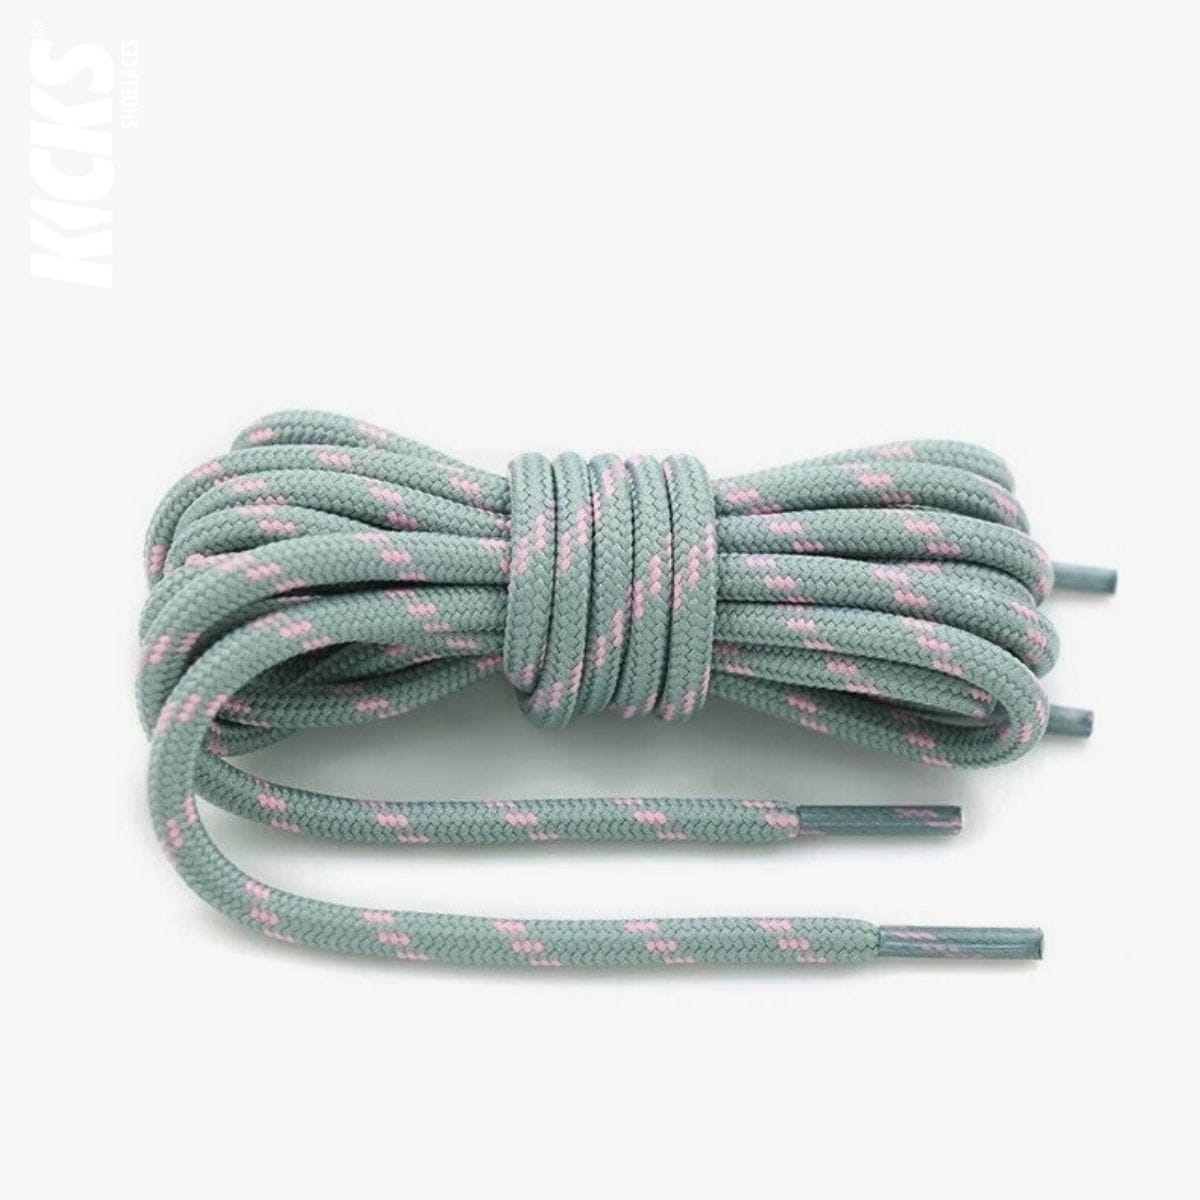 trekking-shoe-laces-united-states-in-light-grey-and-pink-shop-online